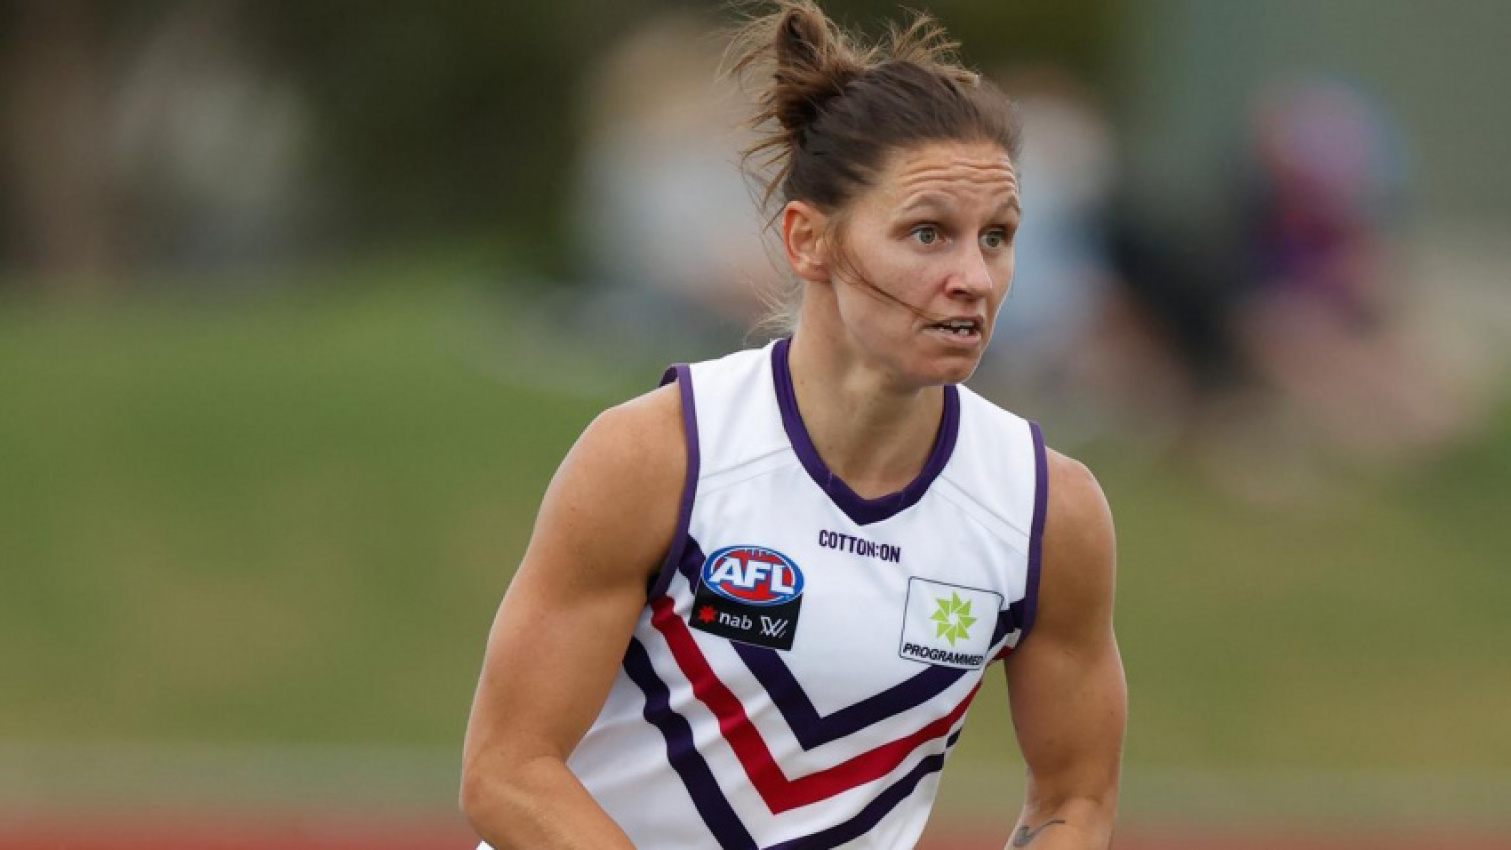 autos, car advice, cars, news, aflw, sport, aflw 2022: all the action and results from round 5